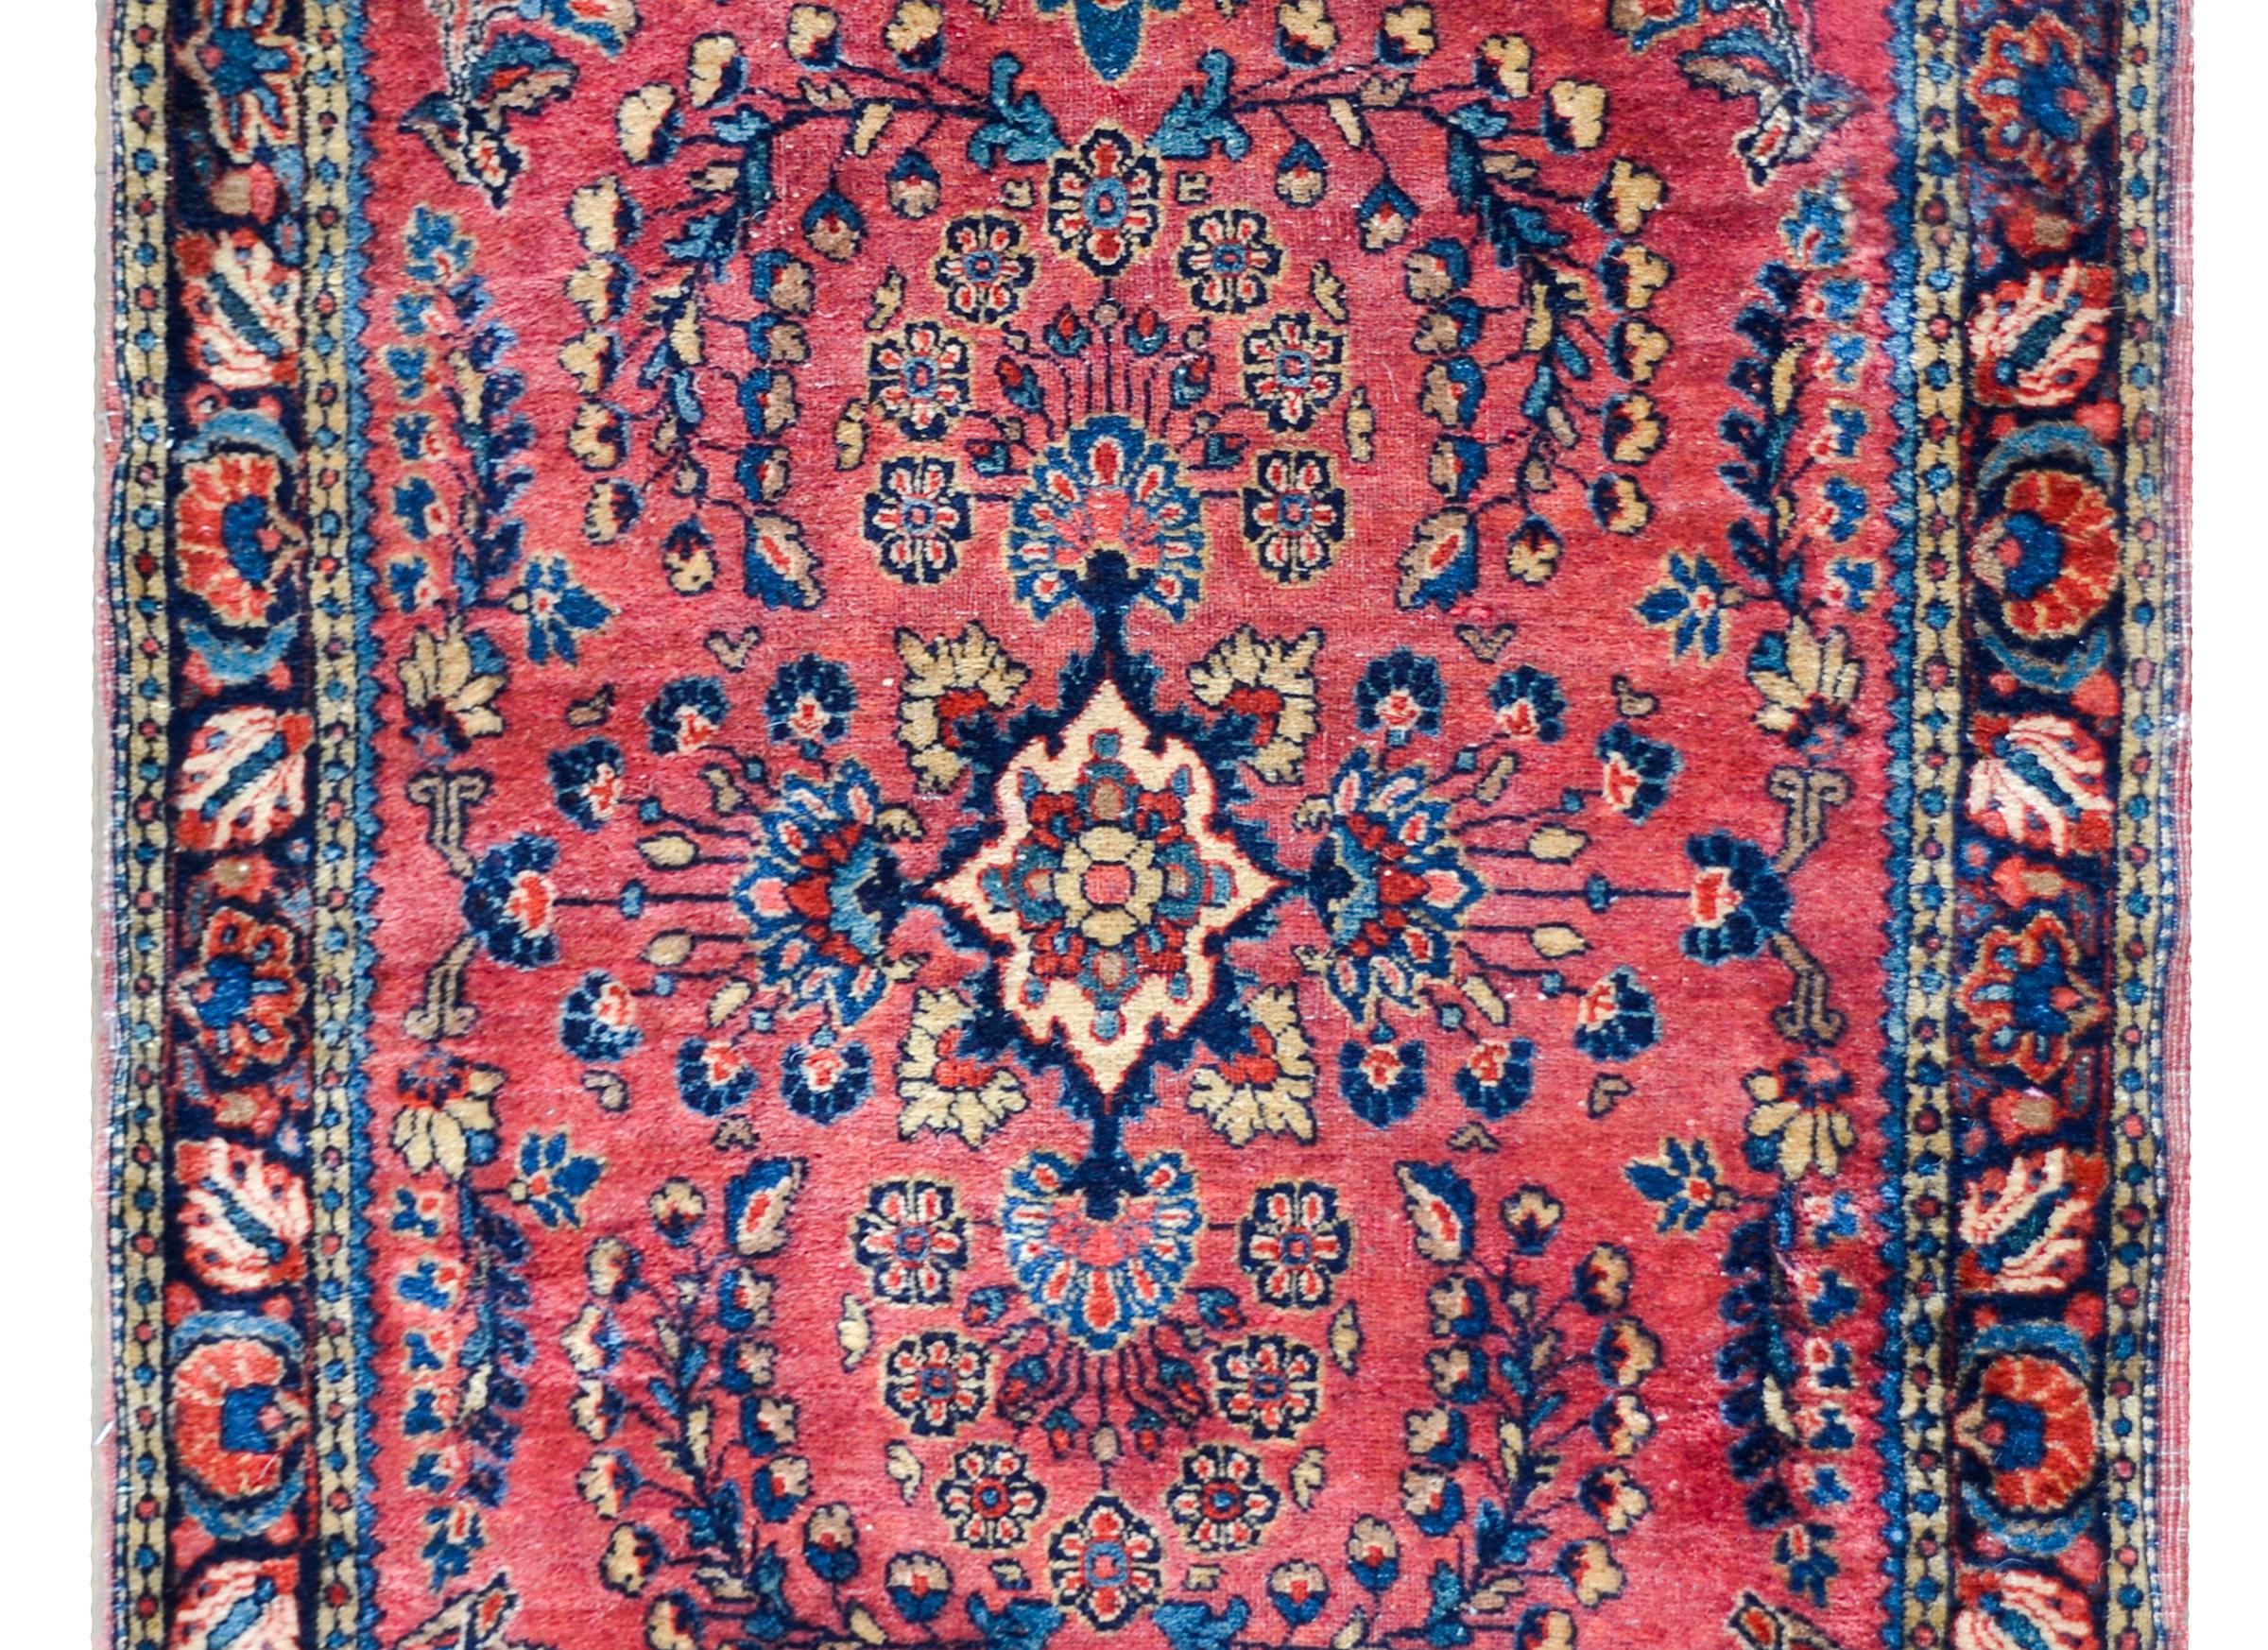 A wonderful early 20th century Persian Sarouk rug with a traditional mirrored floral cluster pattern woven in light and dark indigo, cream, and crimson set against a coral background, and surrounded by a beautiful floral patterned border.